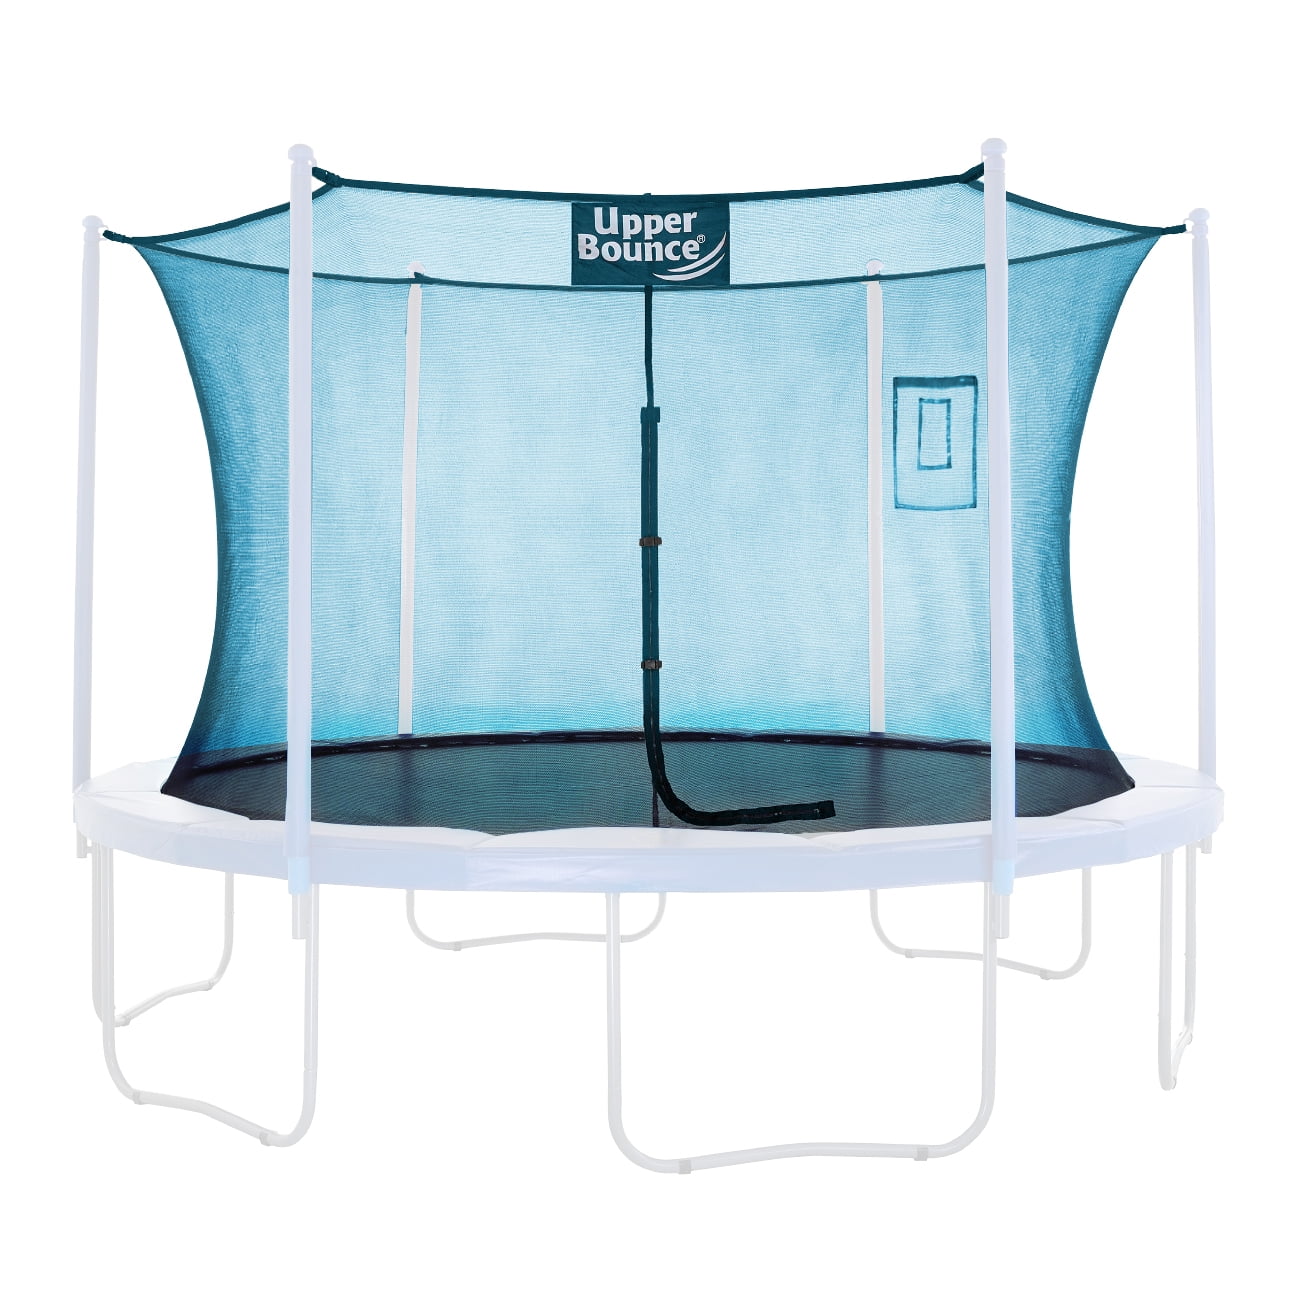 Upper Bounce Replacement Safety Enclosure Net 